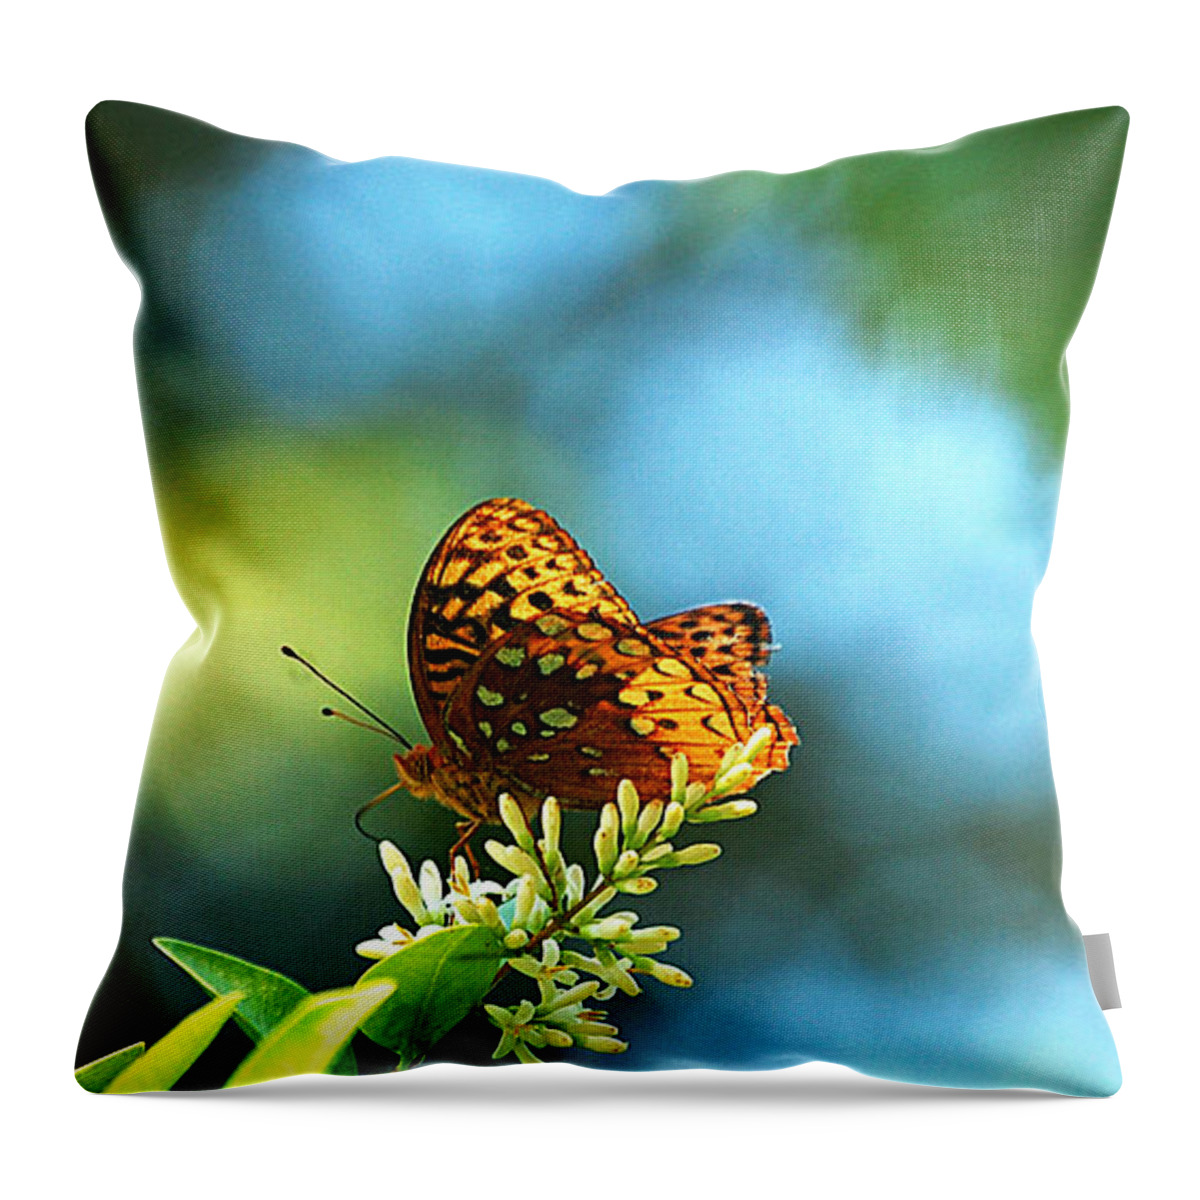 Landscape Throw Pillow featuring the photograph Brown Spotted Butterfly by Peggy Franz